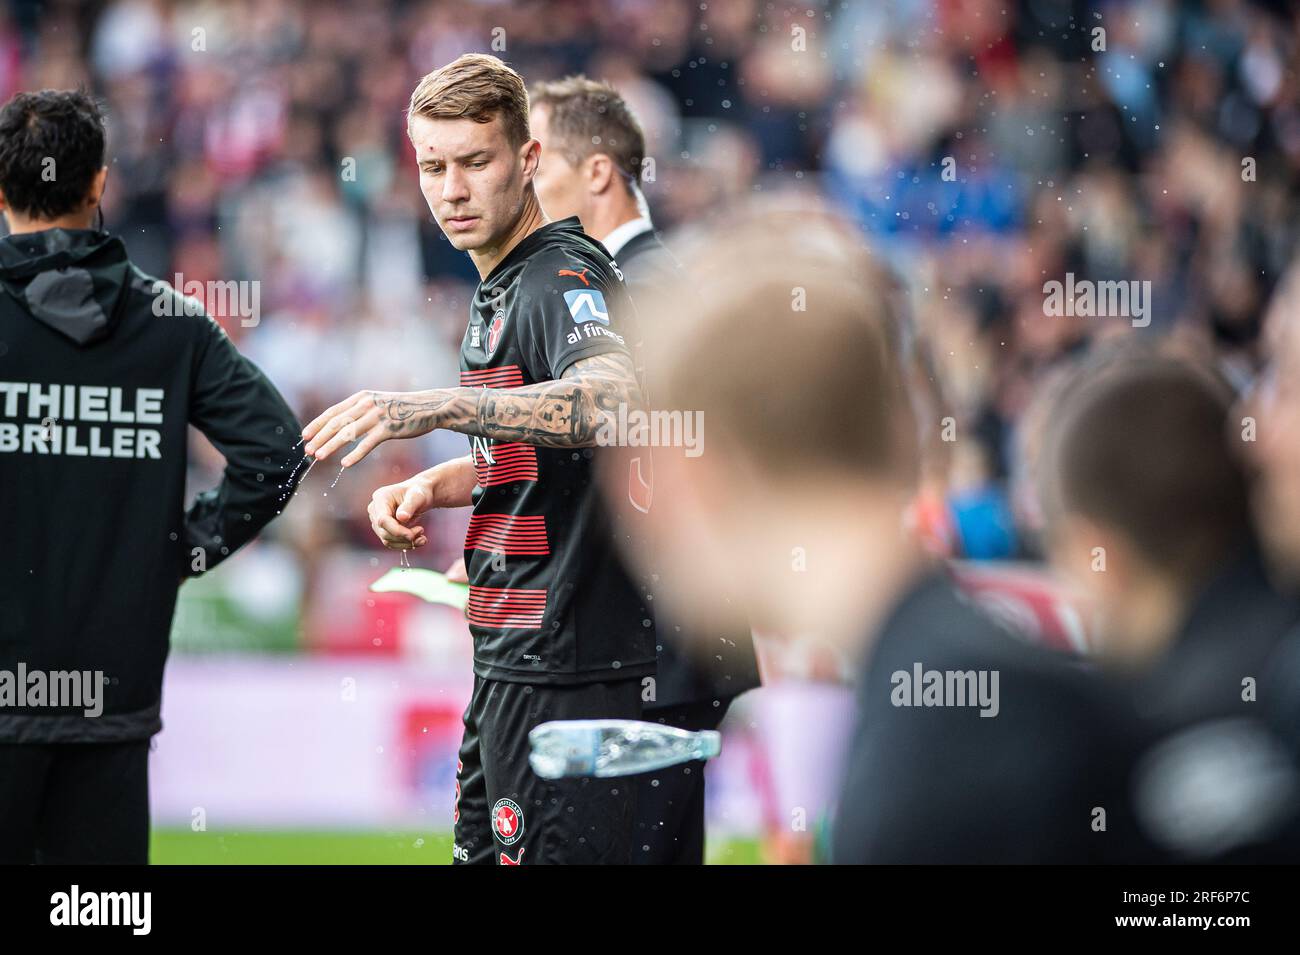 Herning, Denmark. 30th, July 2023. Charles of FC Midtjylland seen during the 3F Superliga match between FC Midtjylland and Silkeborg IF at MCH Arena in Herning. (Photo credit: Gonzales Photo - Morten Kjaer). Stock Photo